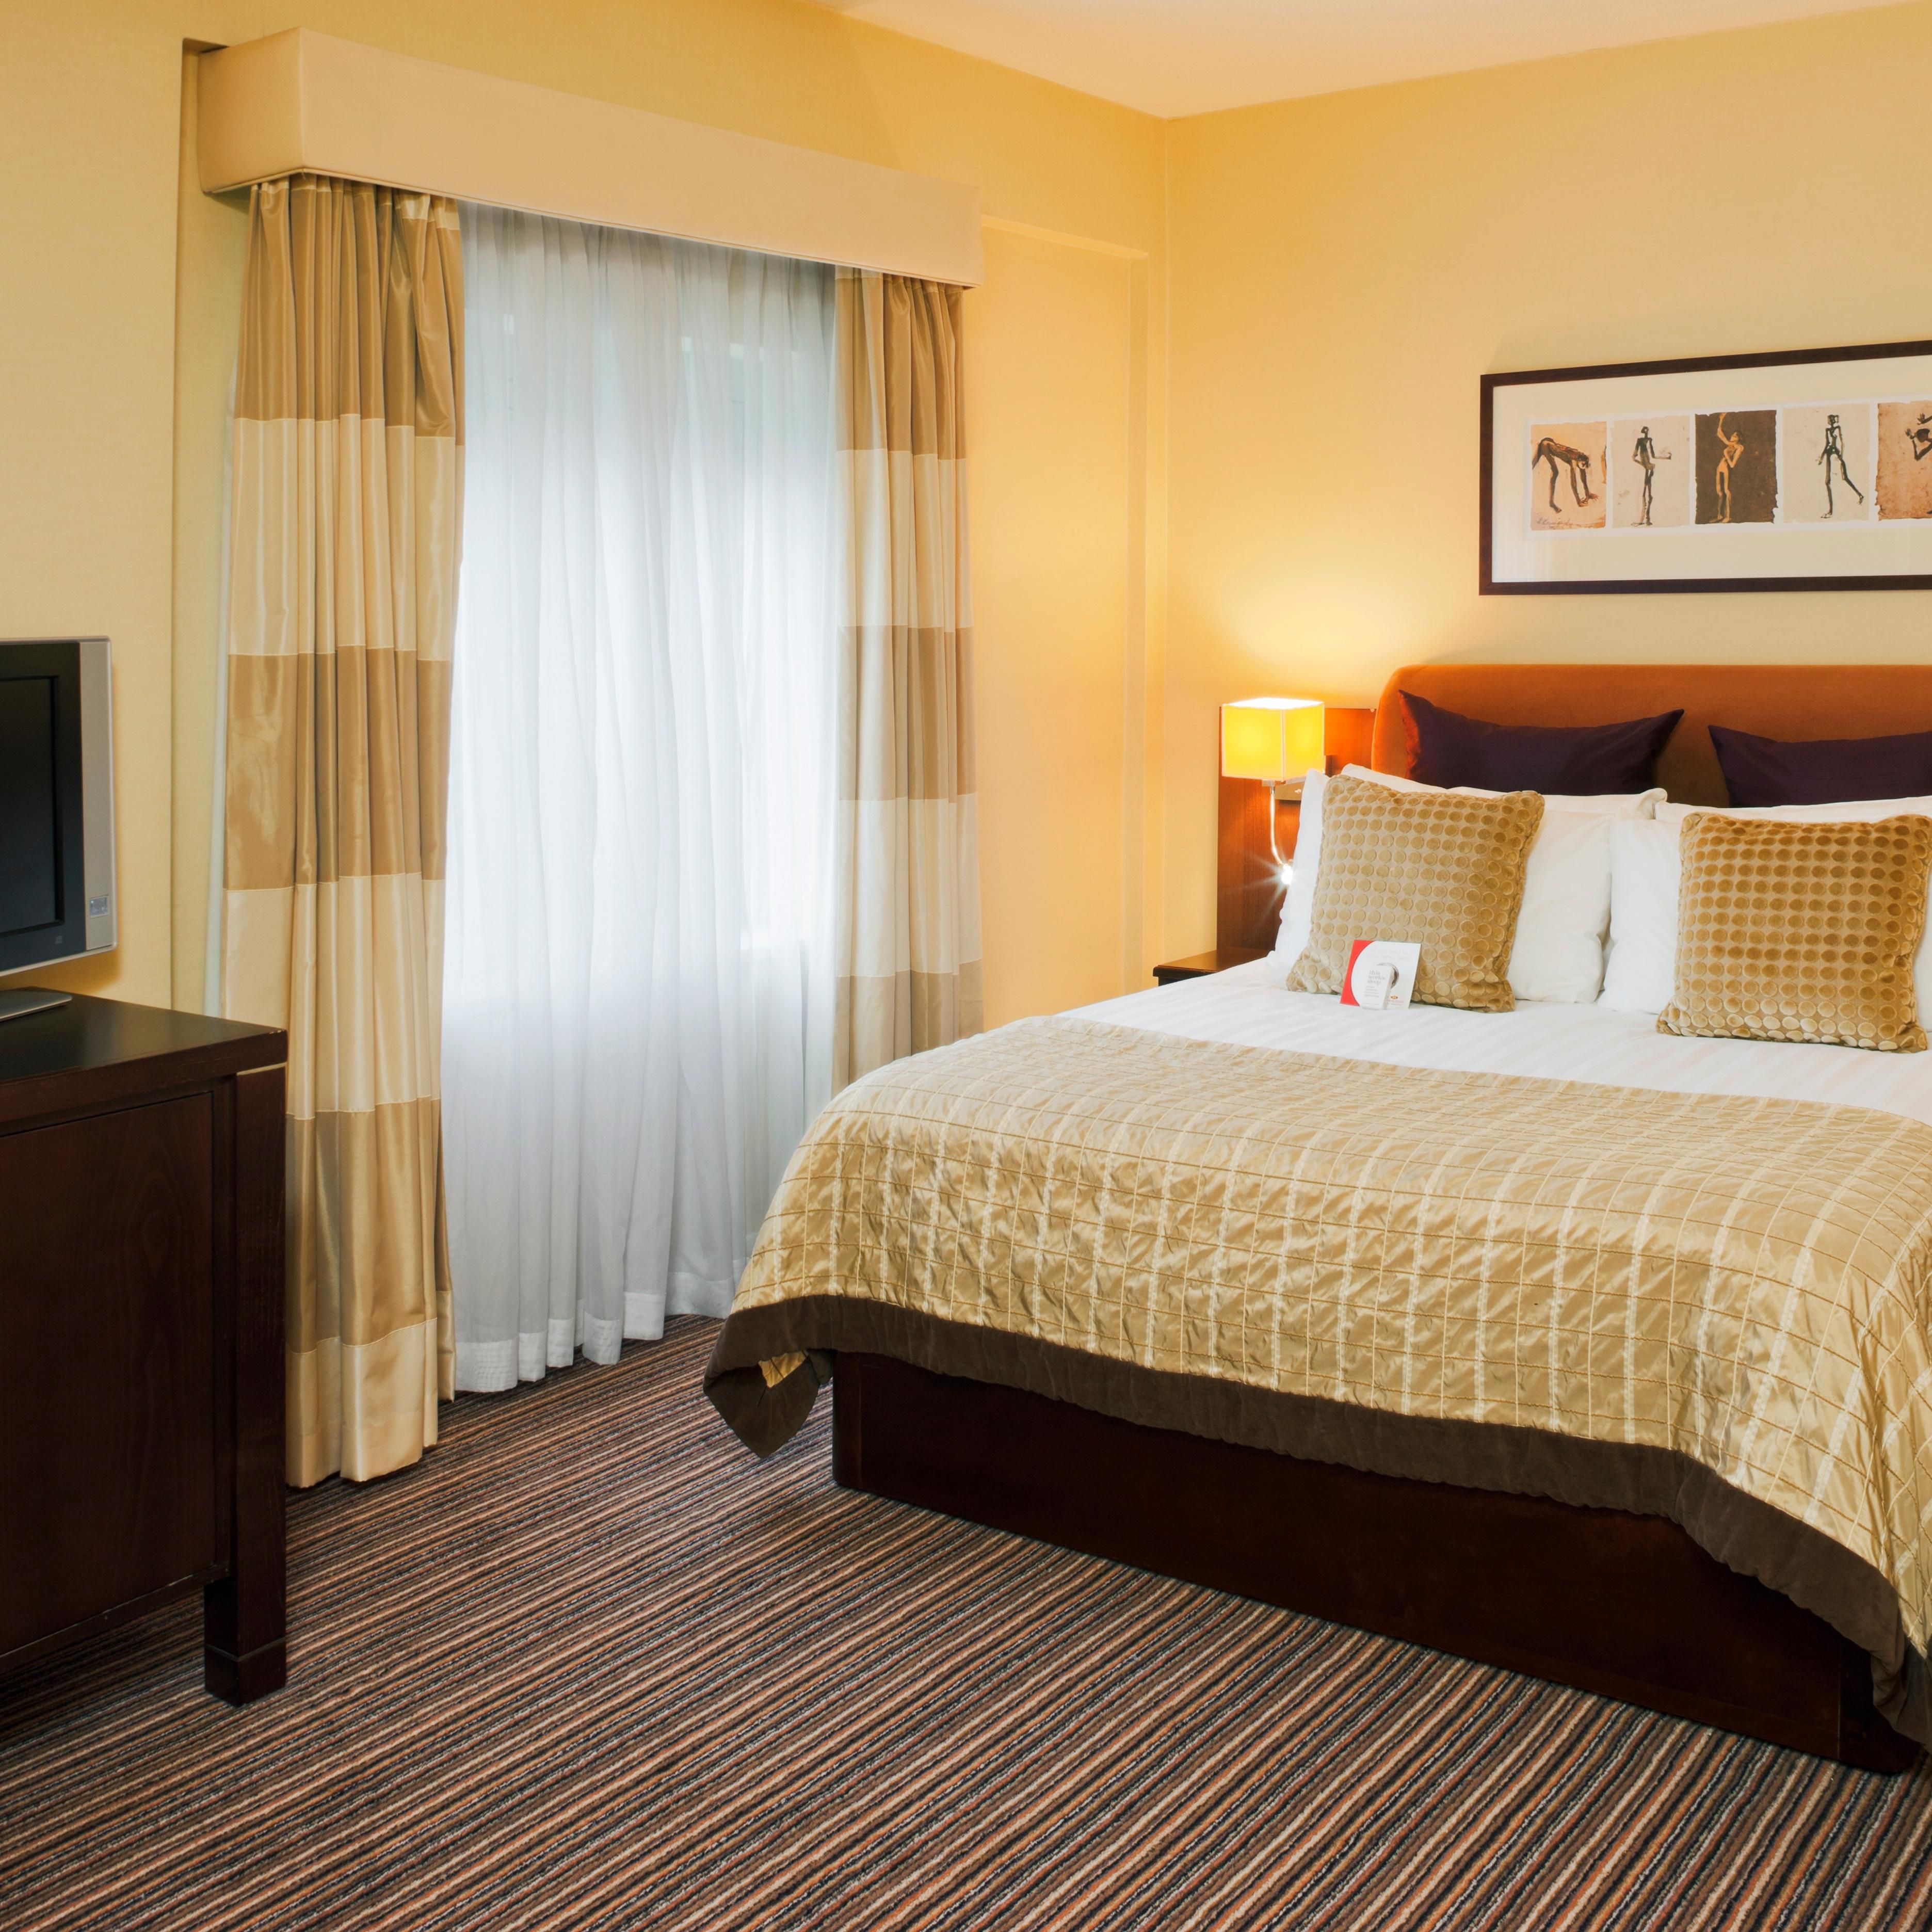 Relax in one of our comfortable, stylish standard rooms